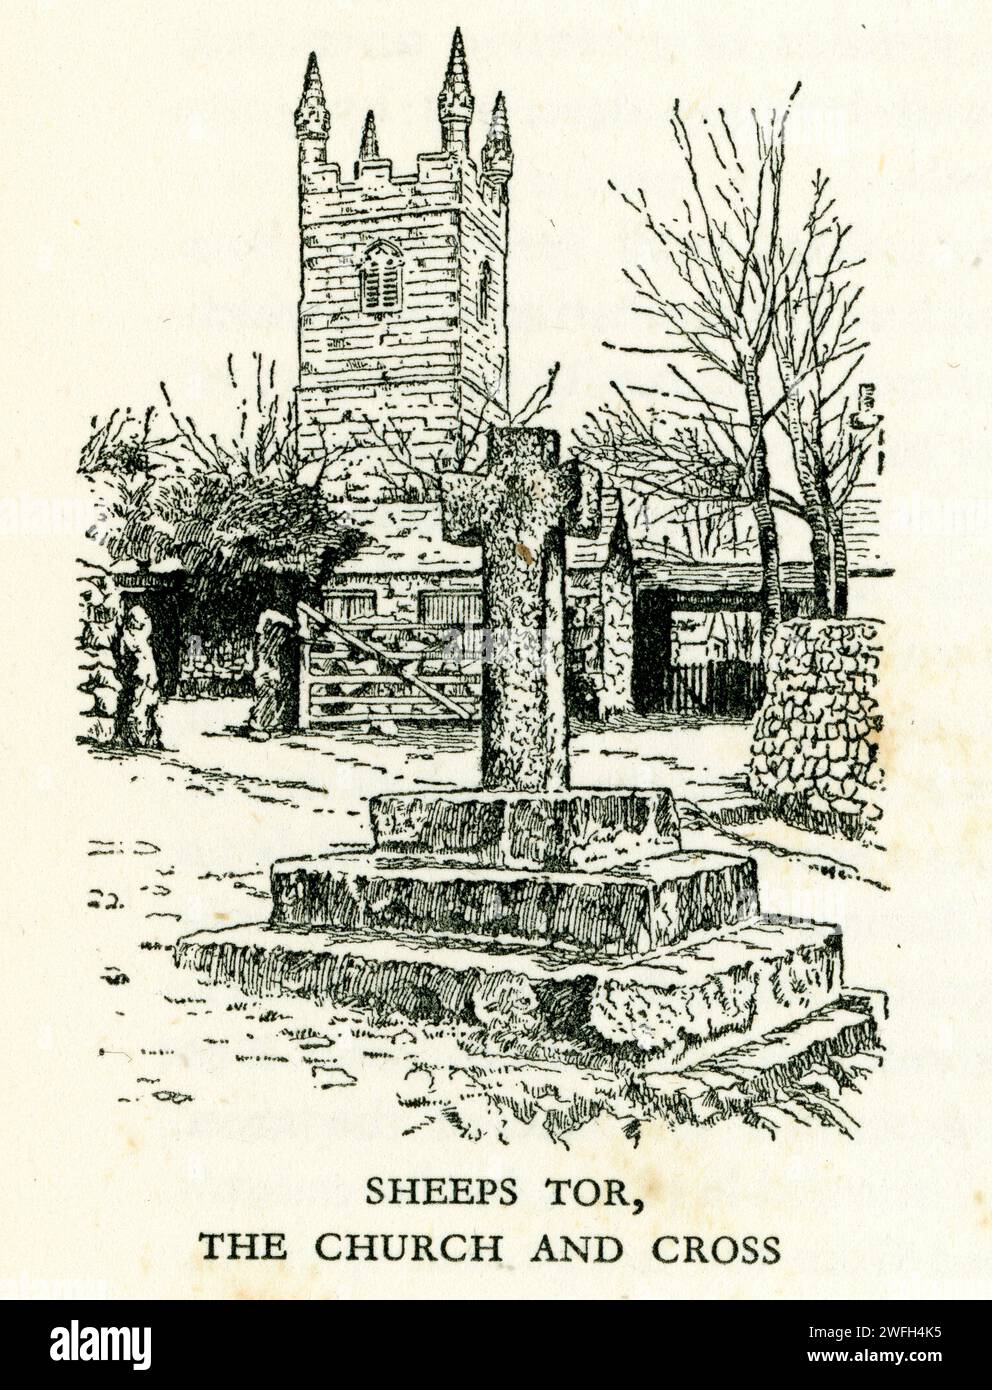 Pen and ink sketch - Sheeps Tor - the church (St Leonard) and cross. Illustration from the book Glorious Devon, by S.P.B. Mais, published by London Great Western Railway Company, 1928 Stock Photo